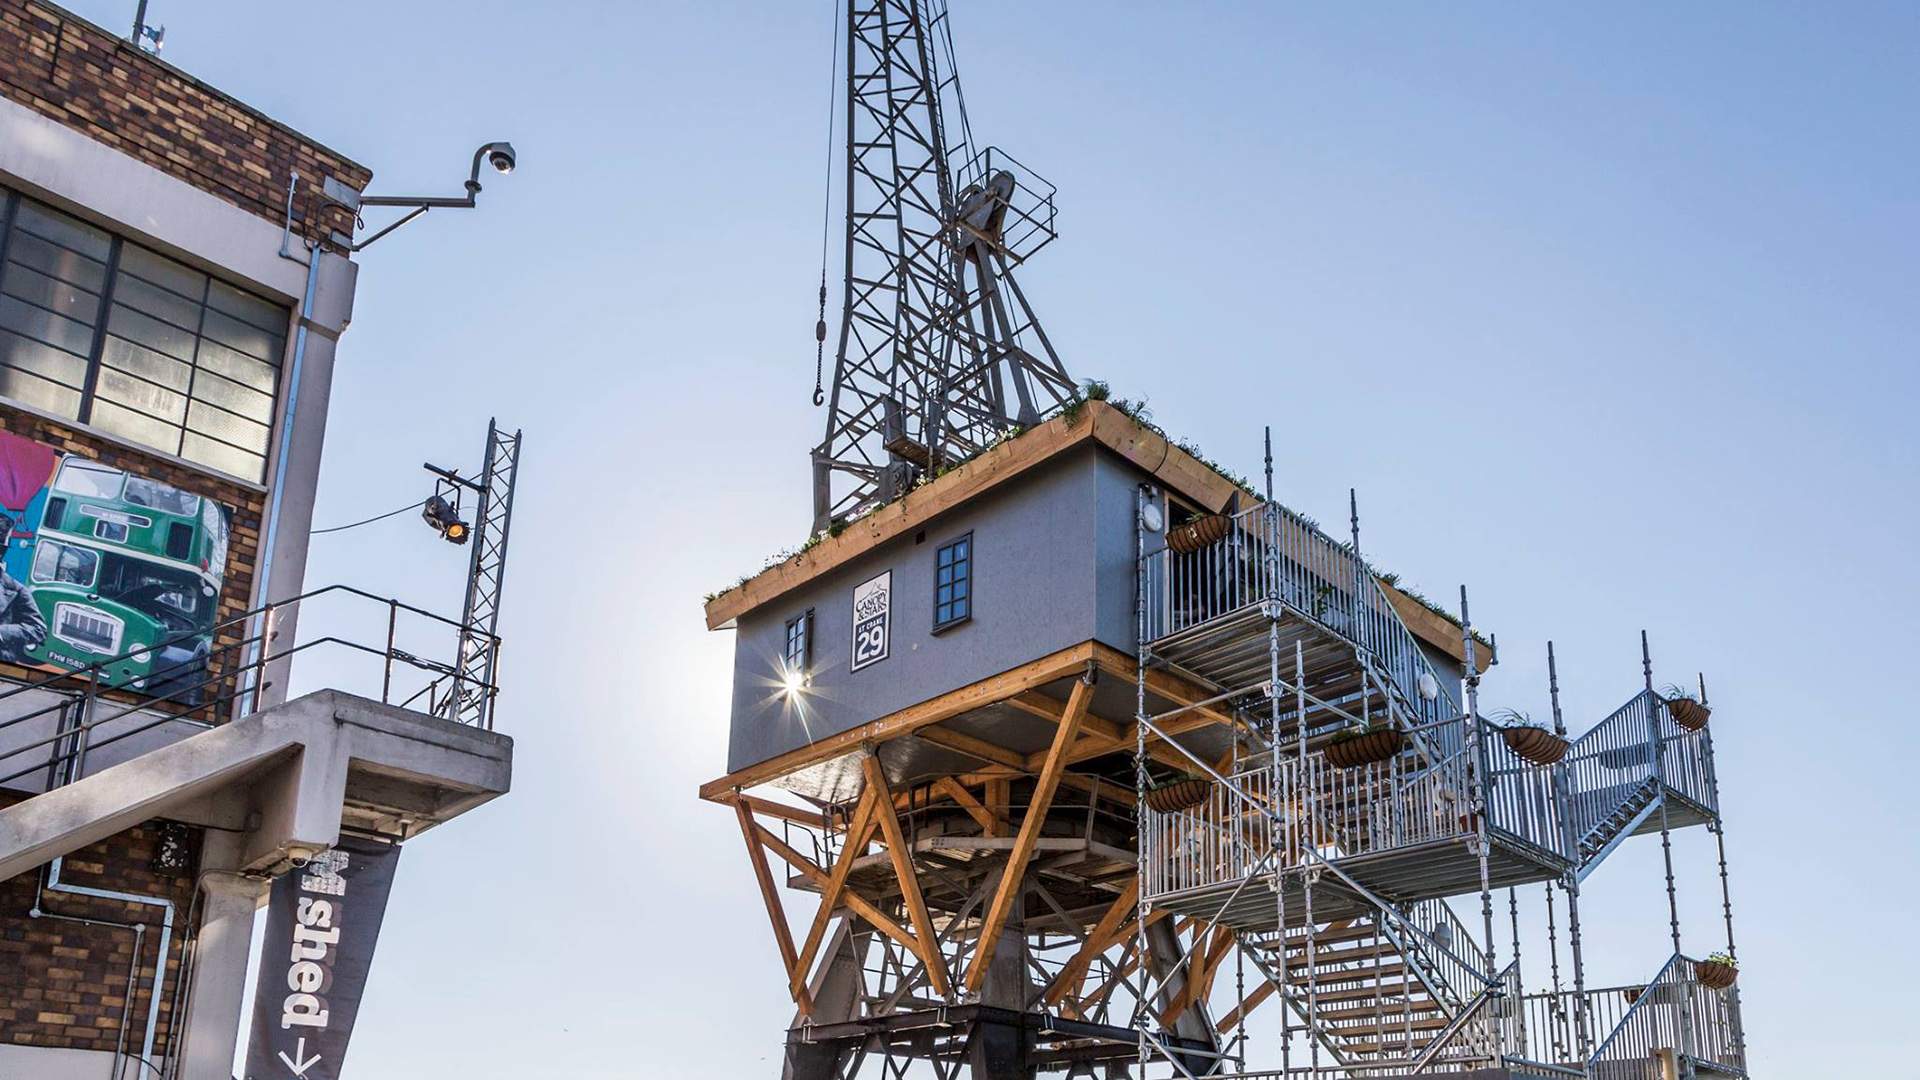 You Can Now Stay in the World's First Treehouse on a Crane